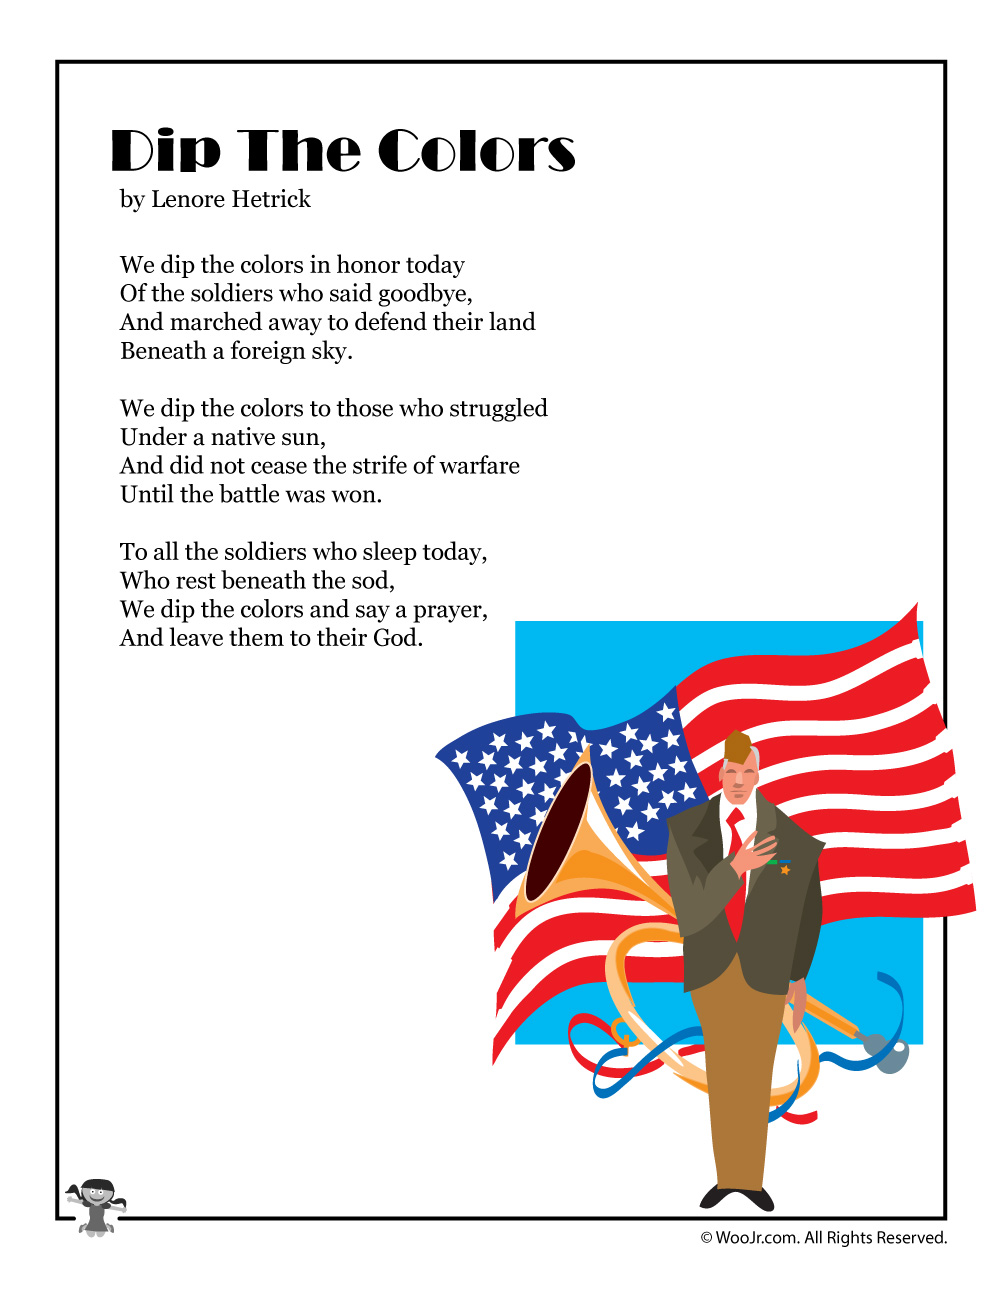 Dip the Color Famous Poems Memorial Day Image